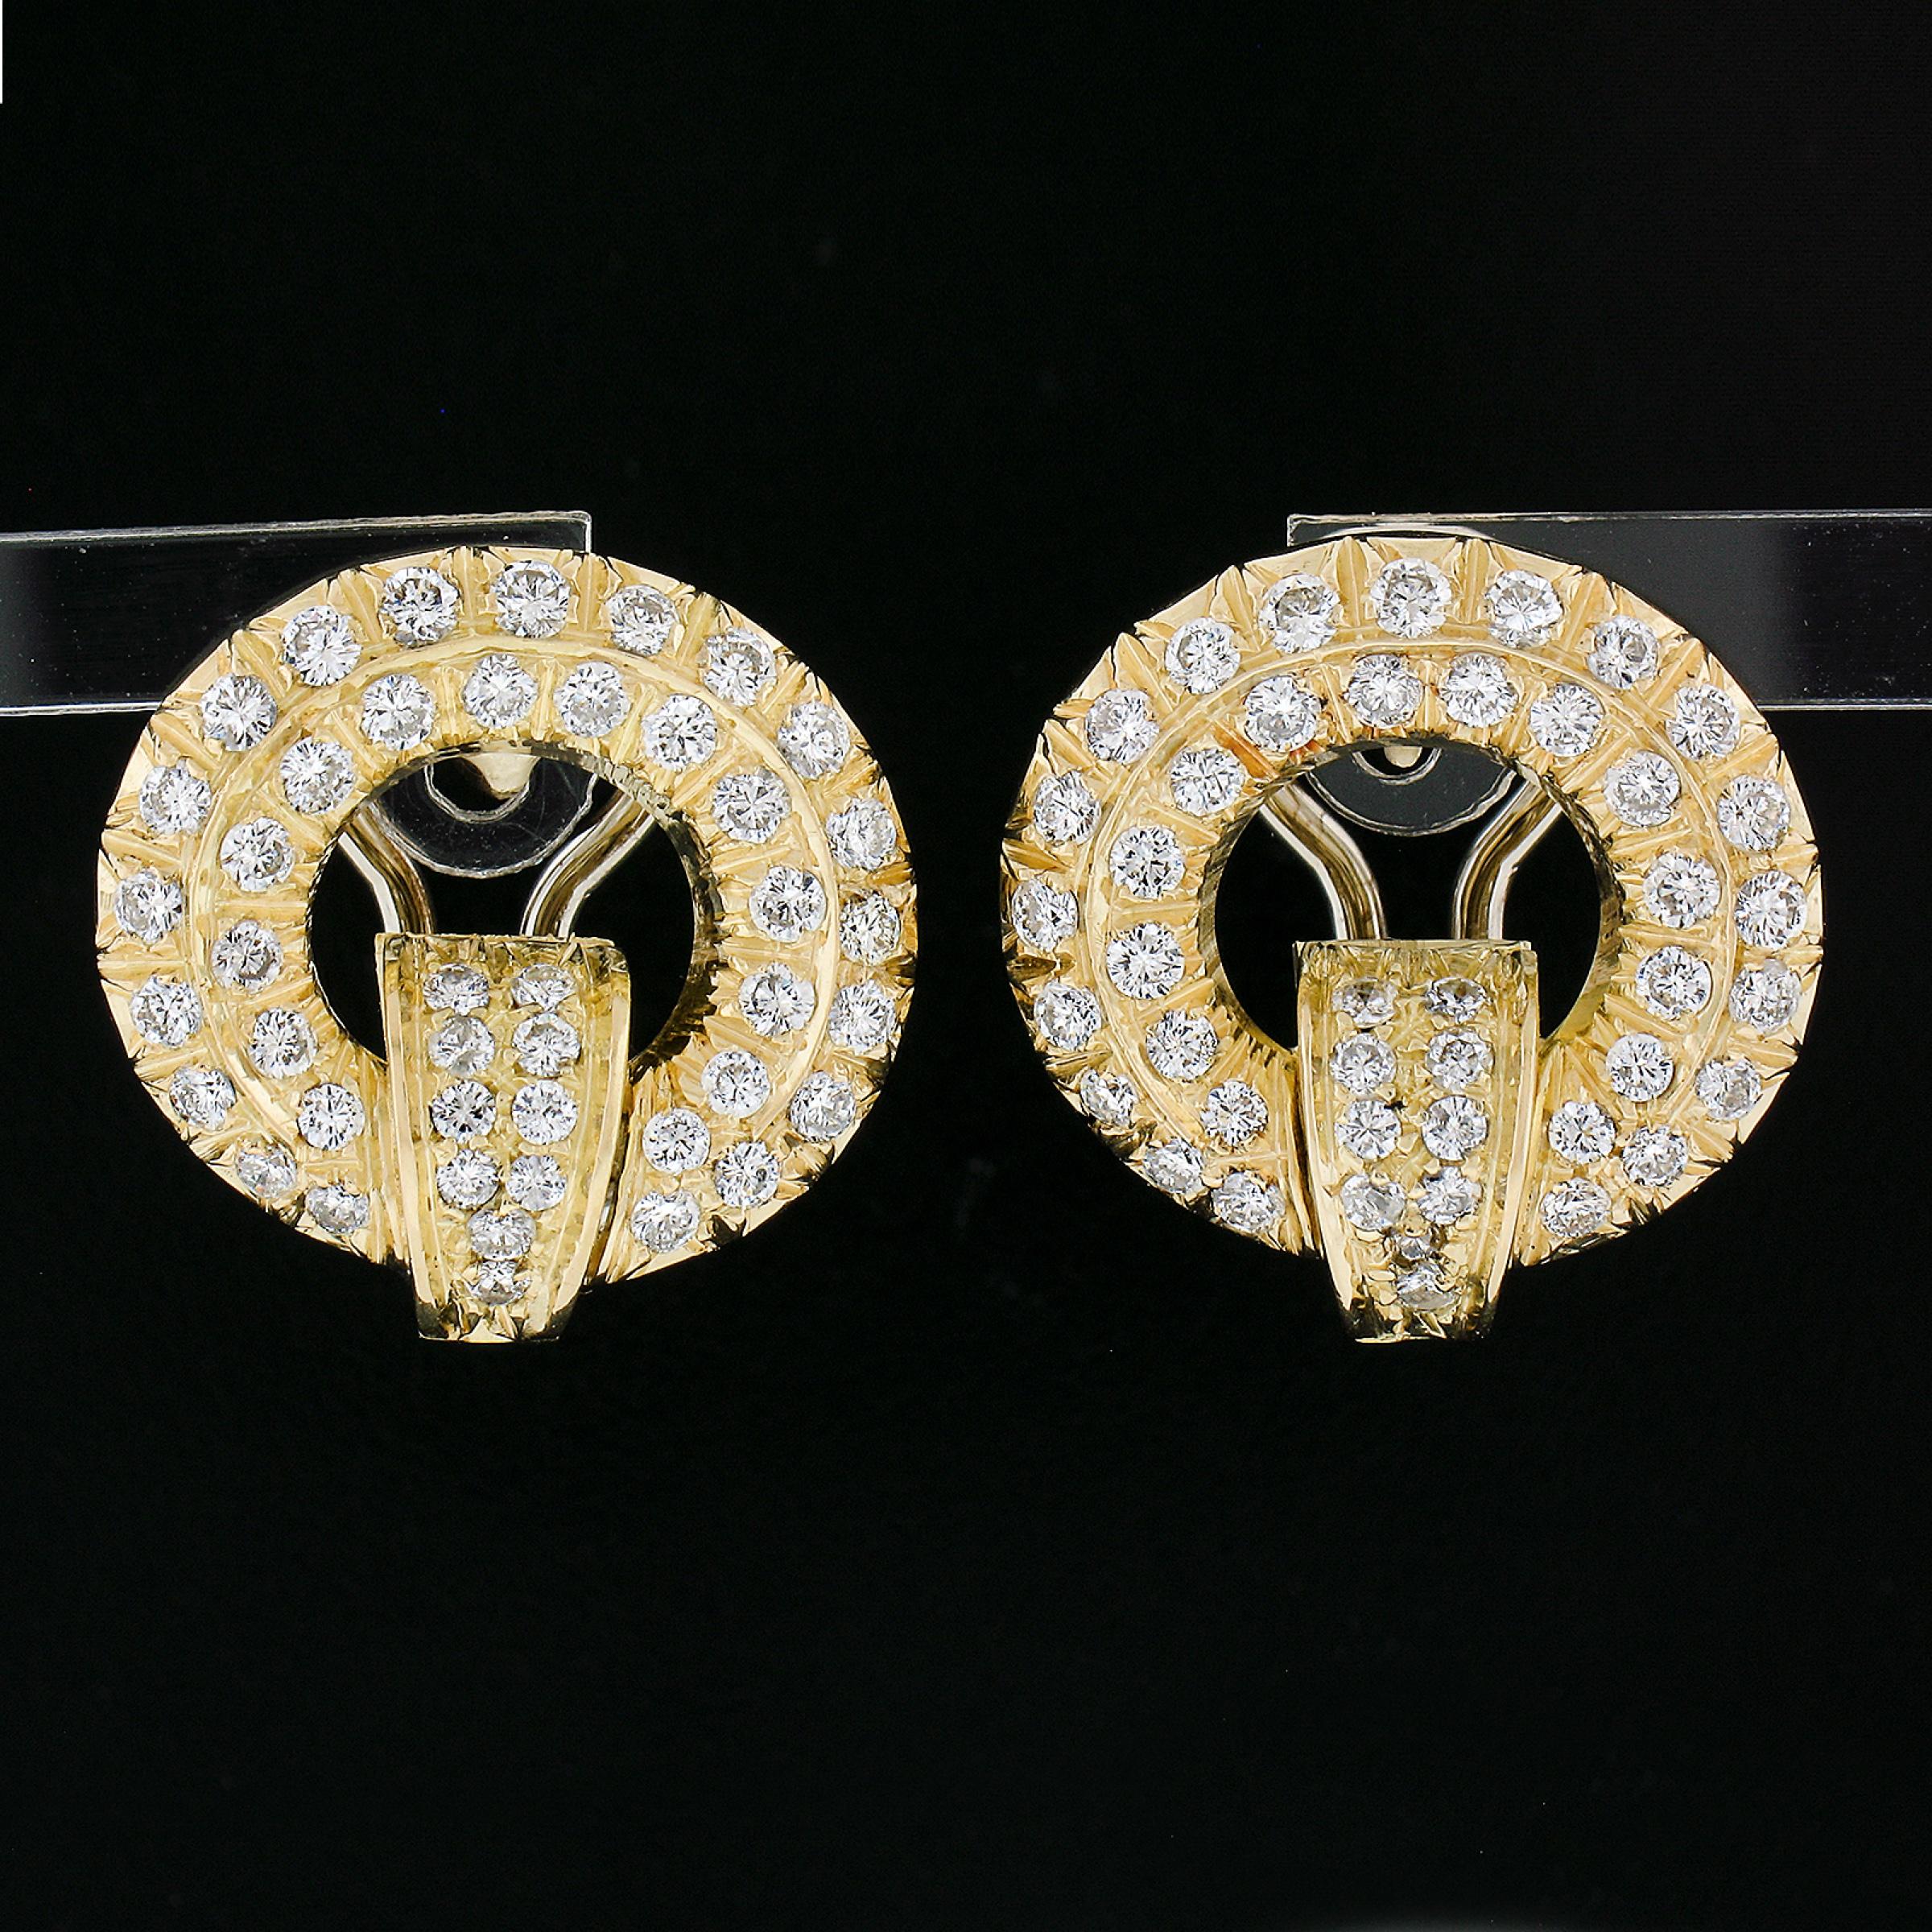 --Stone(s):--
(86) Natural Genuine Diamonds - Round Brilliant Cut - Pavé Set - F/G Color - VS1-SI2 Clarity
Total Carat Weight:	1.60 (approx.)

Material: Solid 18K Yellow Gold w/ White Gold Backs
Weight: 13.24 Grams
Backing:	Post backs w/ omega